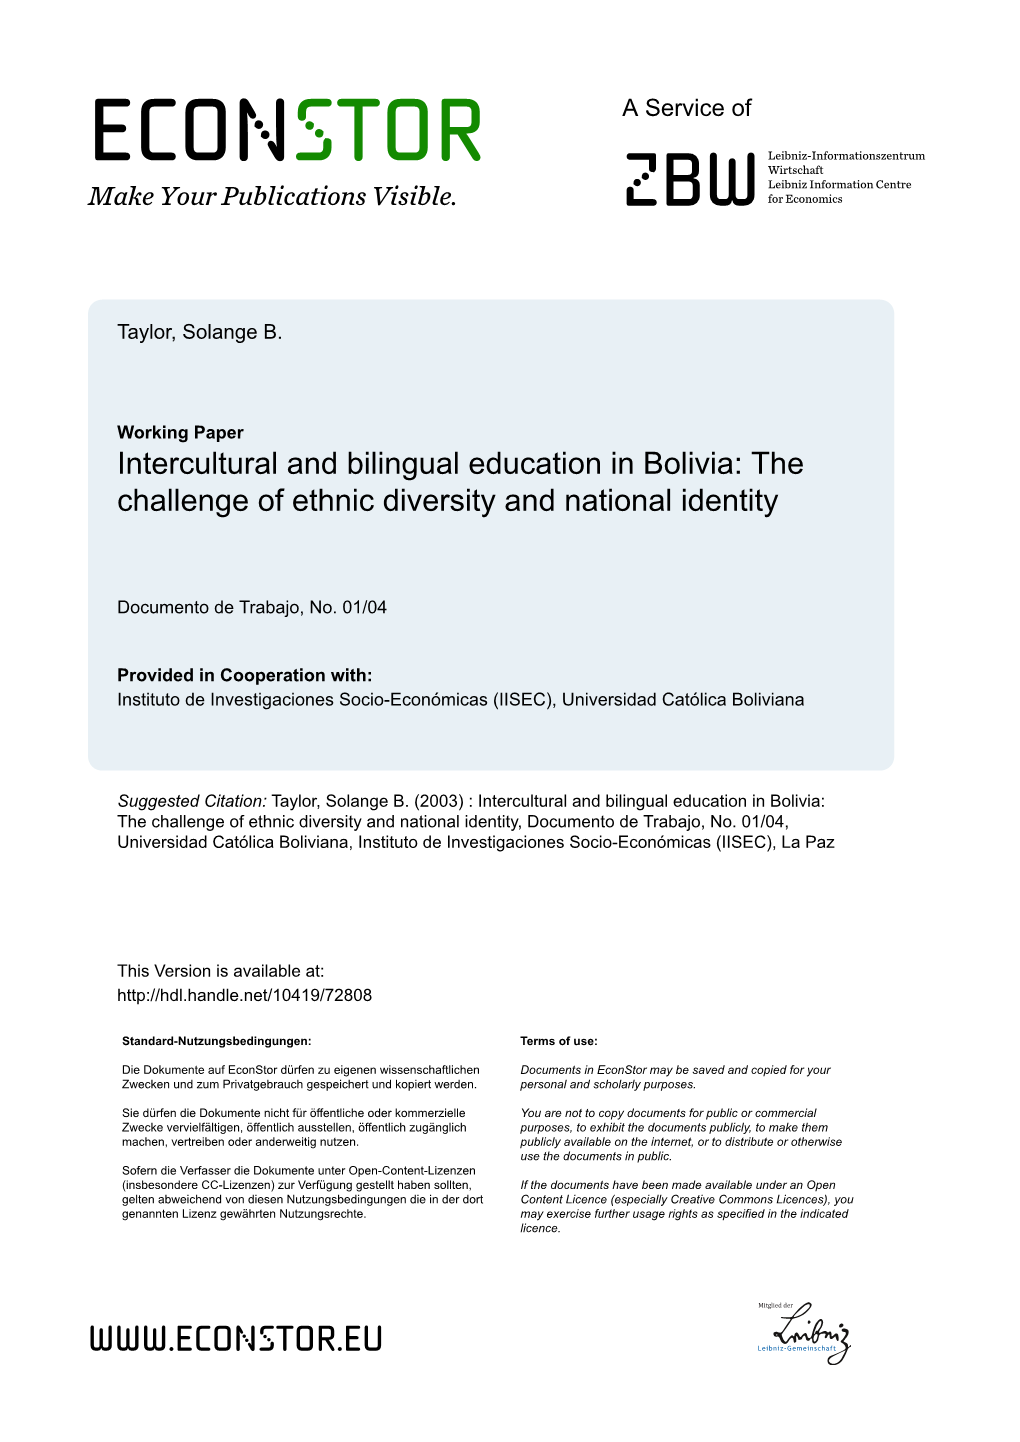 Intercultural and Bilingual Education in Bolivia: the Challenge of Ethnic Diversity and National Identity